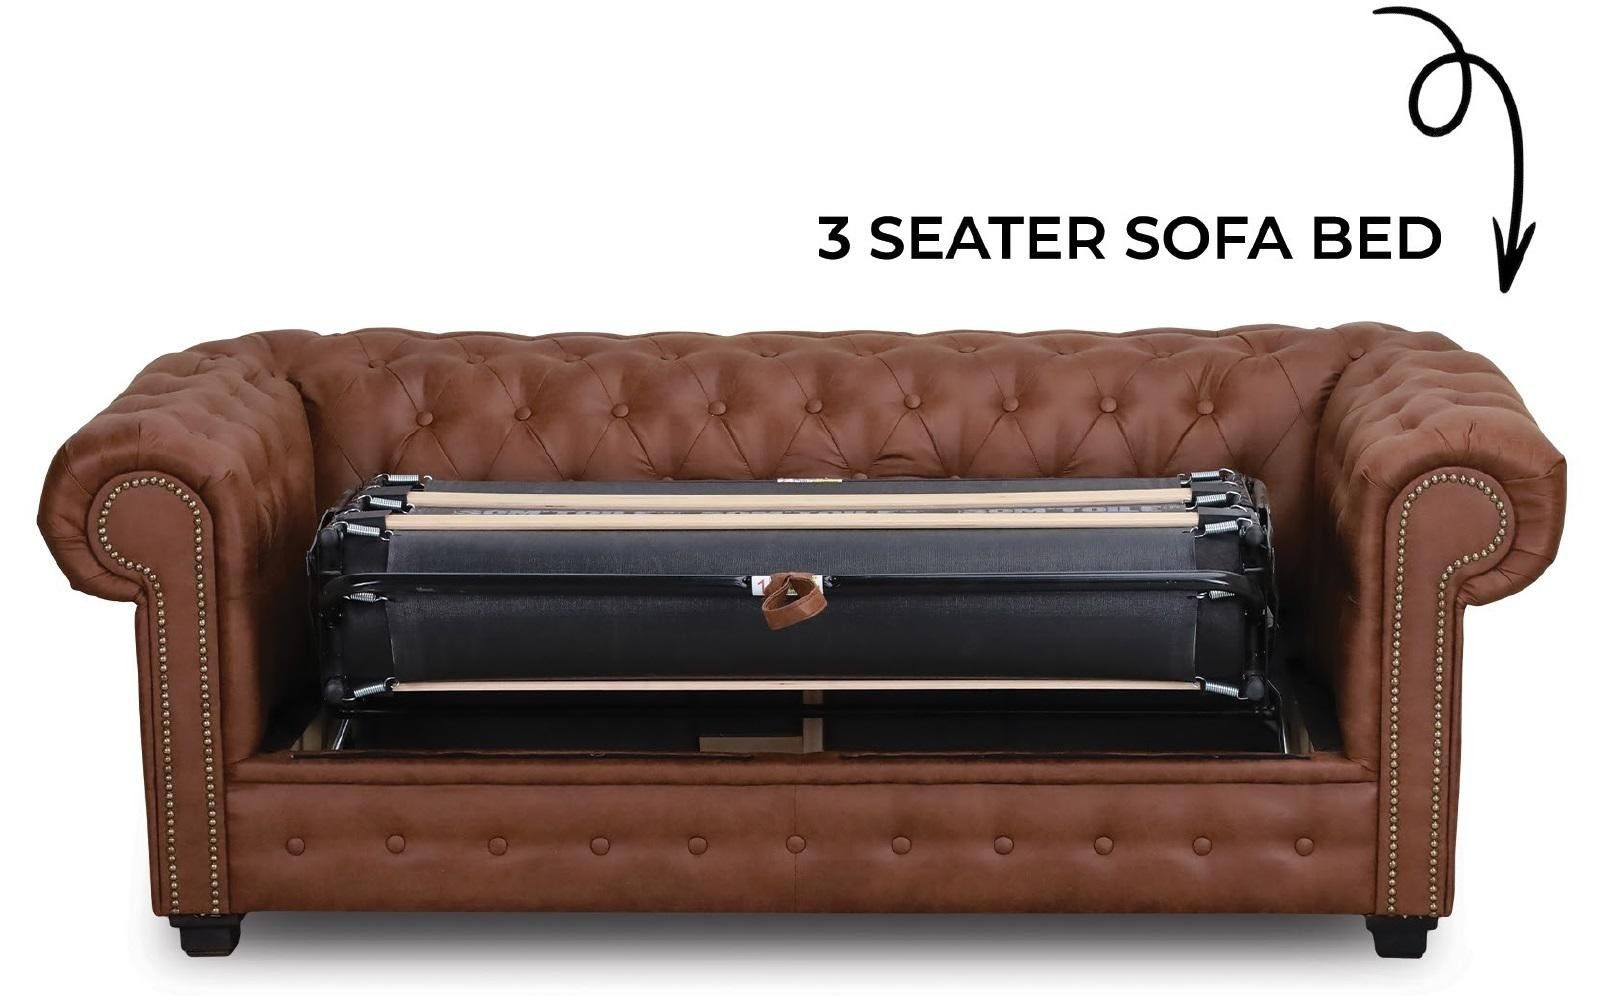 JVmoebel Sofa Chesterfield Sofa mit Bettfunktion Couch Polster Möbel Schlafsofa, Made in Europe